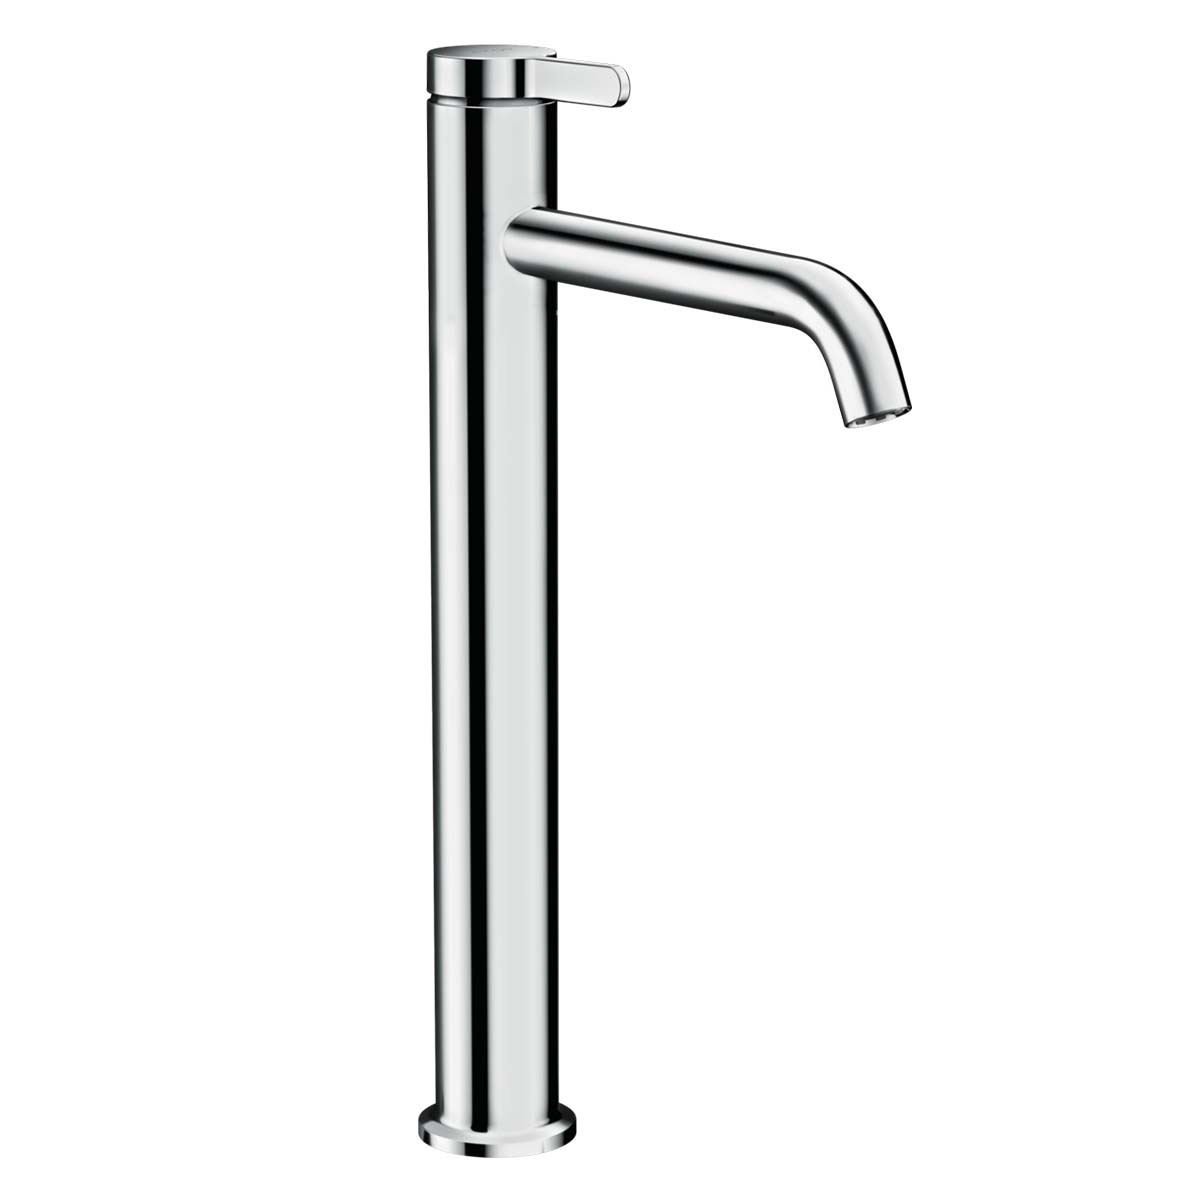 Axor One 260 Tall Basin Mixer Tap with Waste Polished Chrome